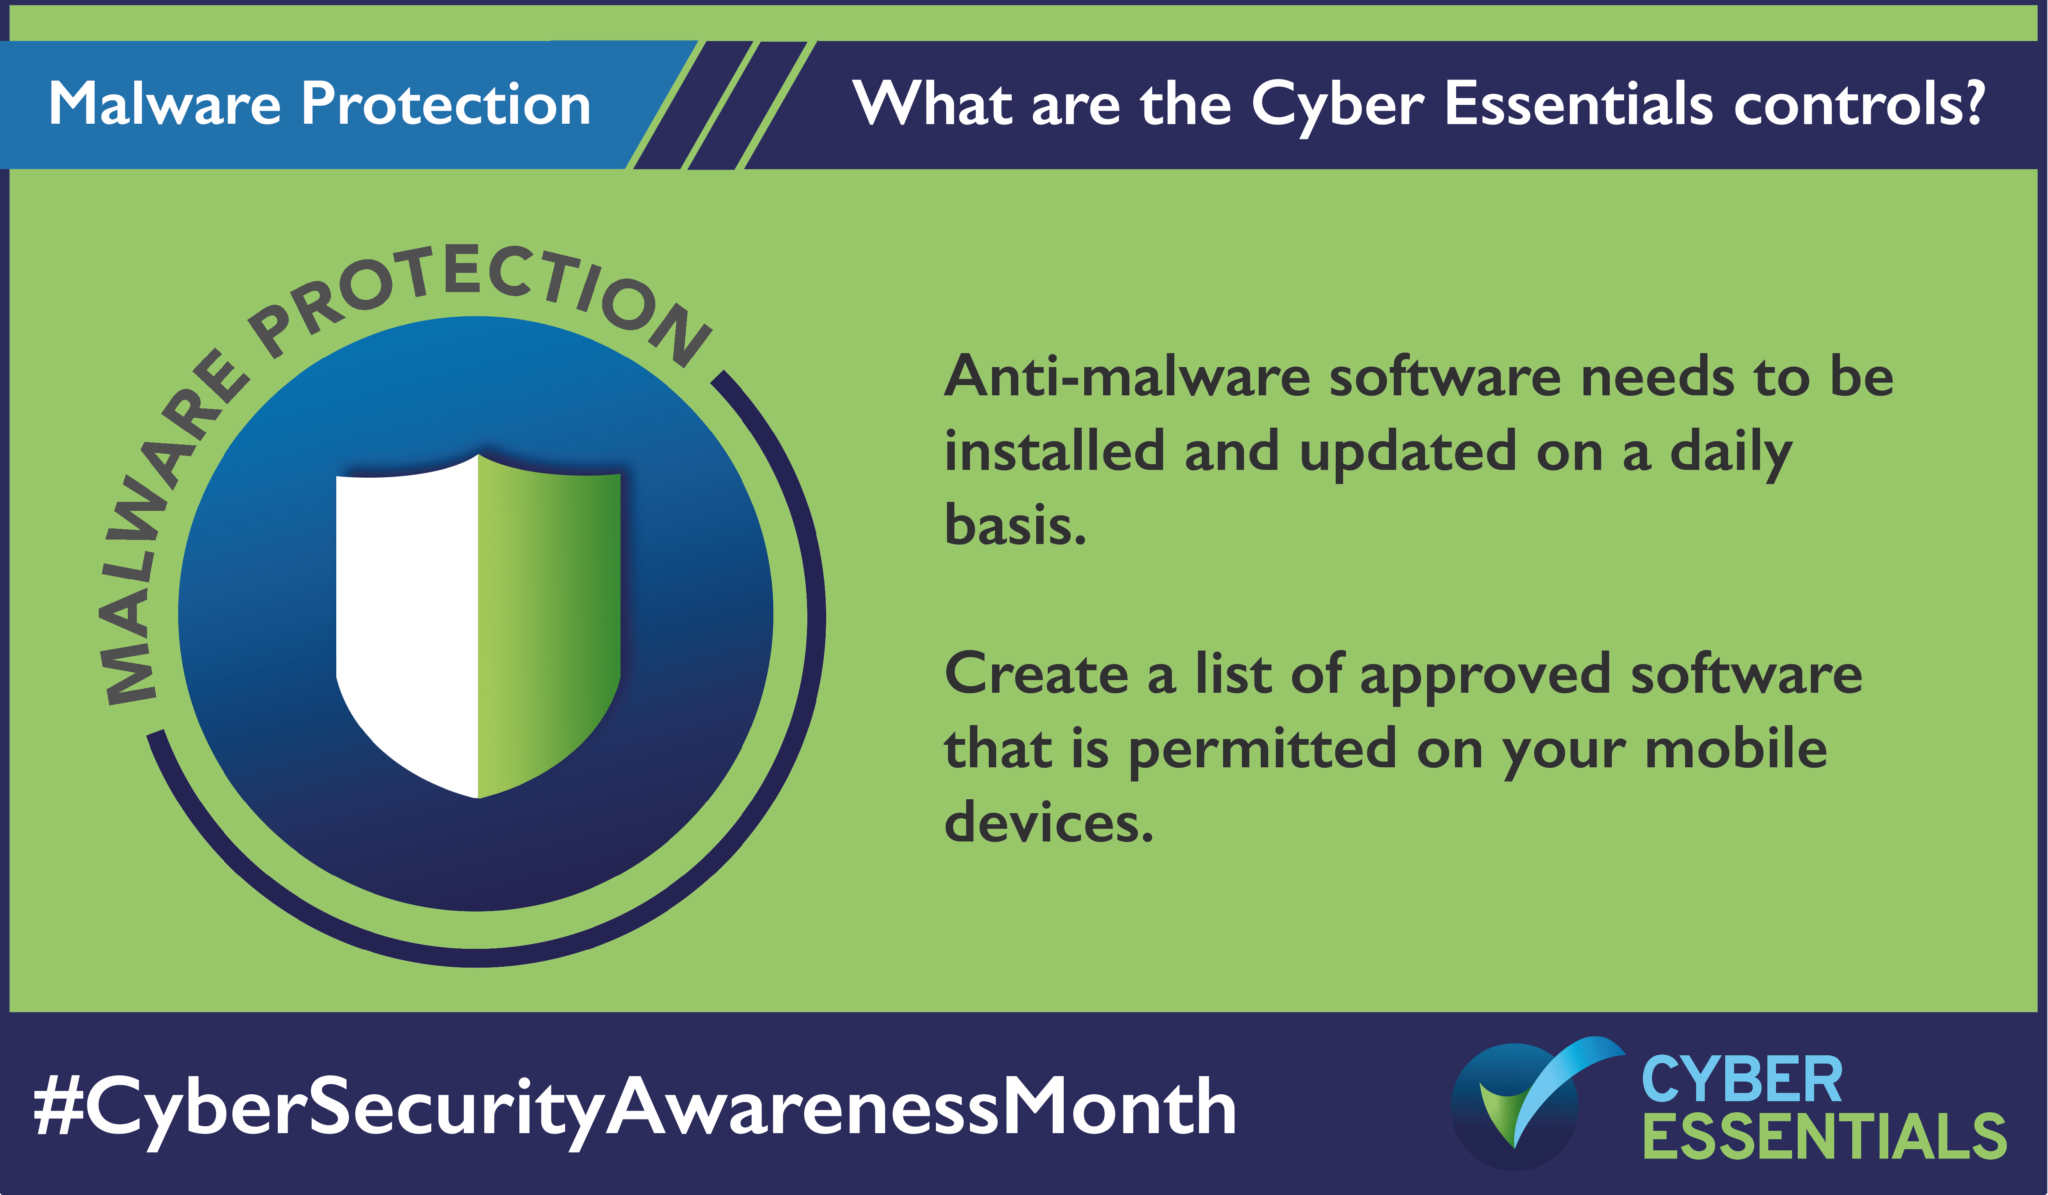 Cyber Essentials Control Malware Protection